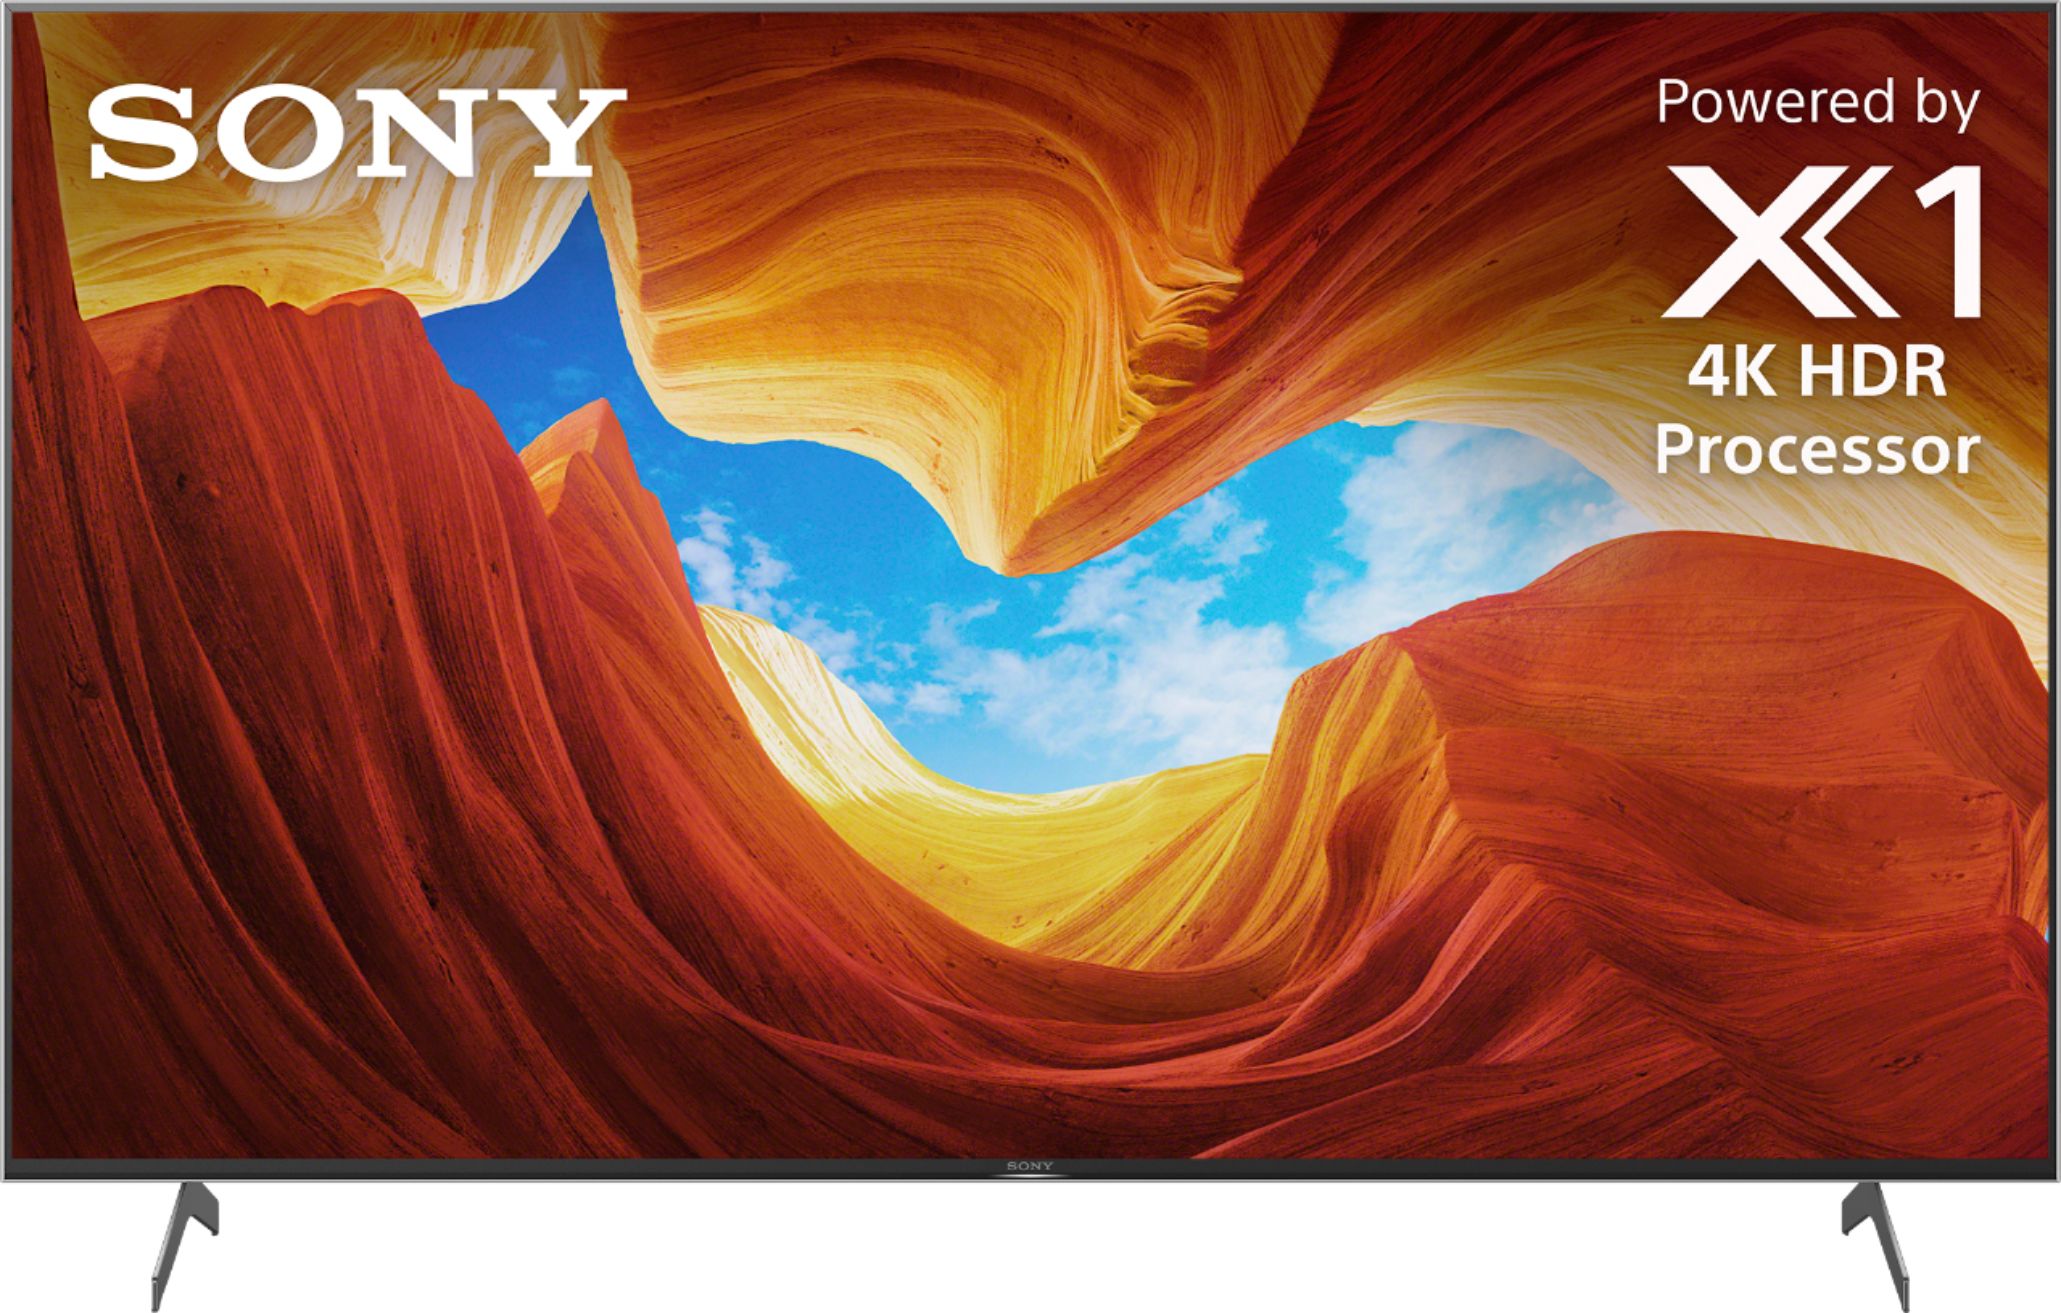 Sony - 75" Class X900H Series LED 4K UHD Smart Android TV